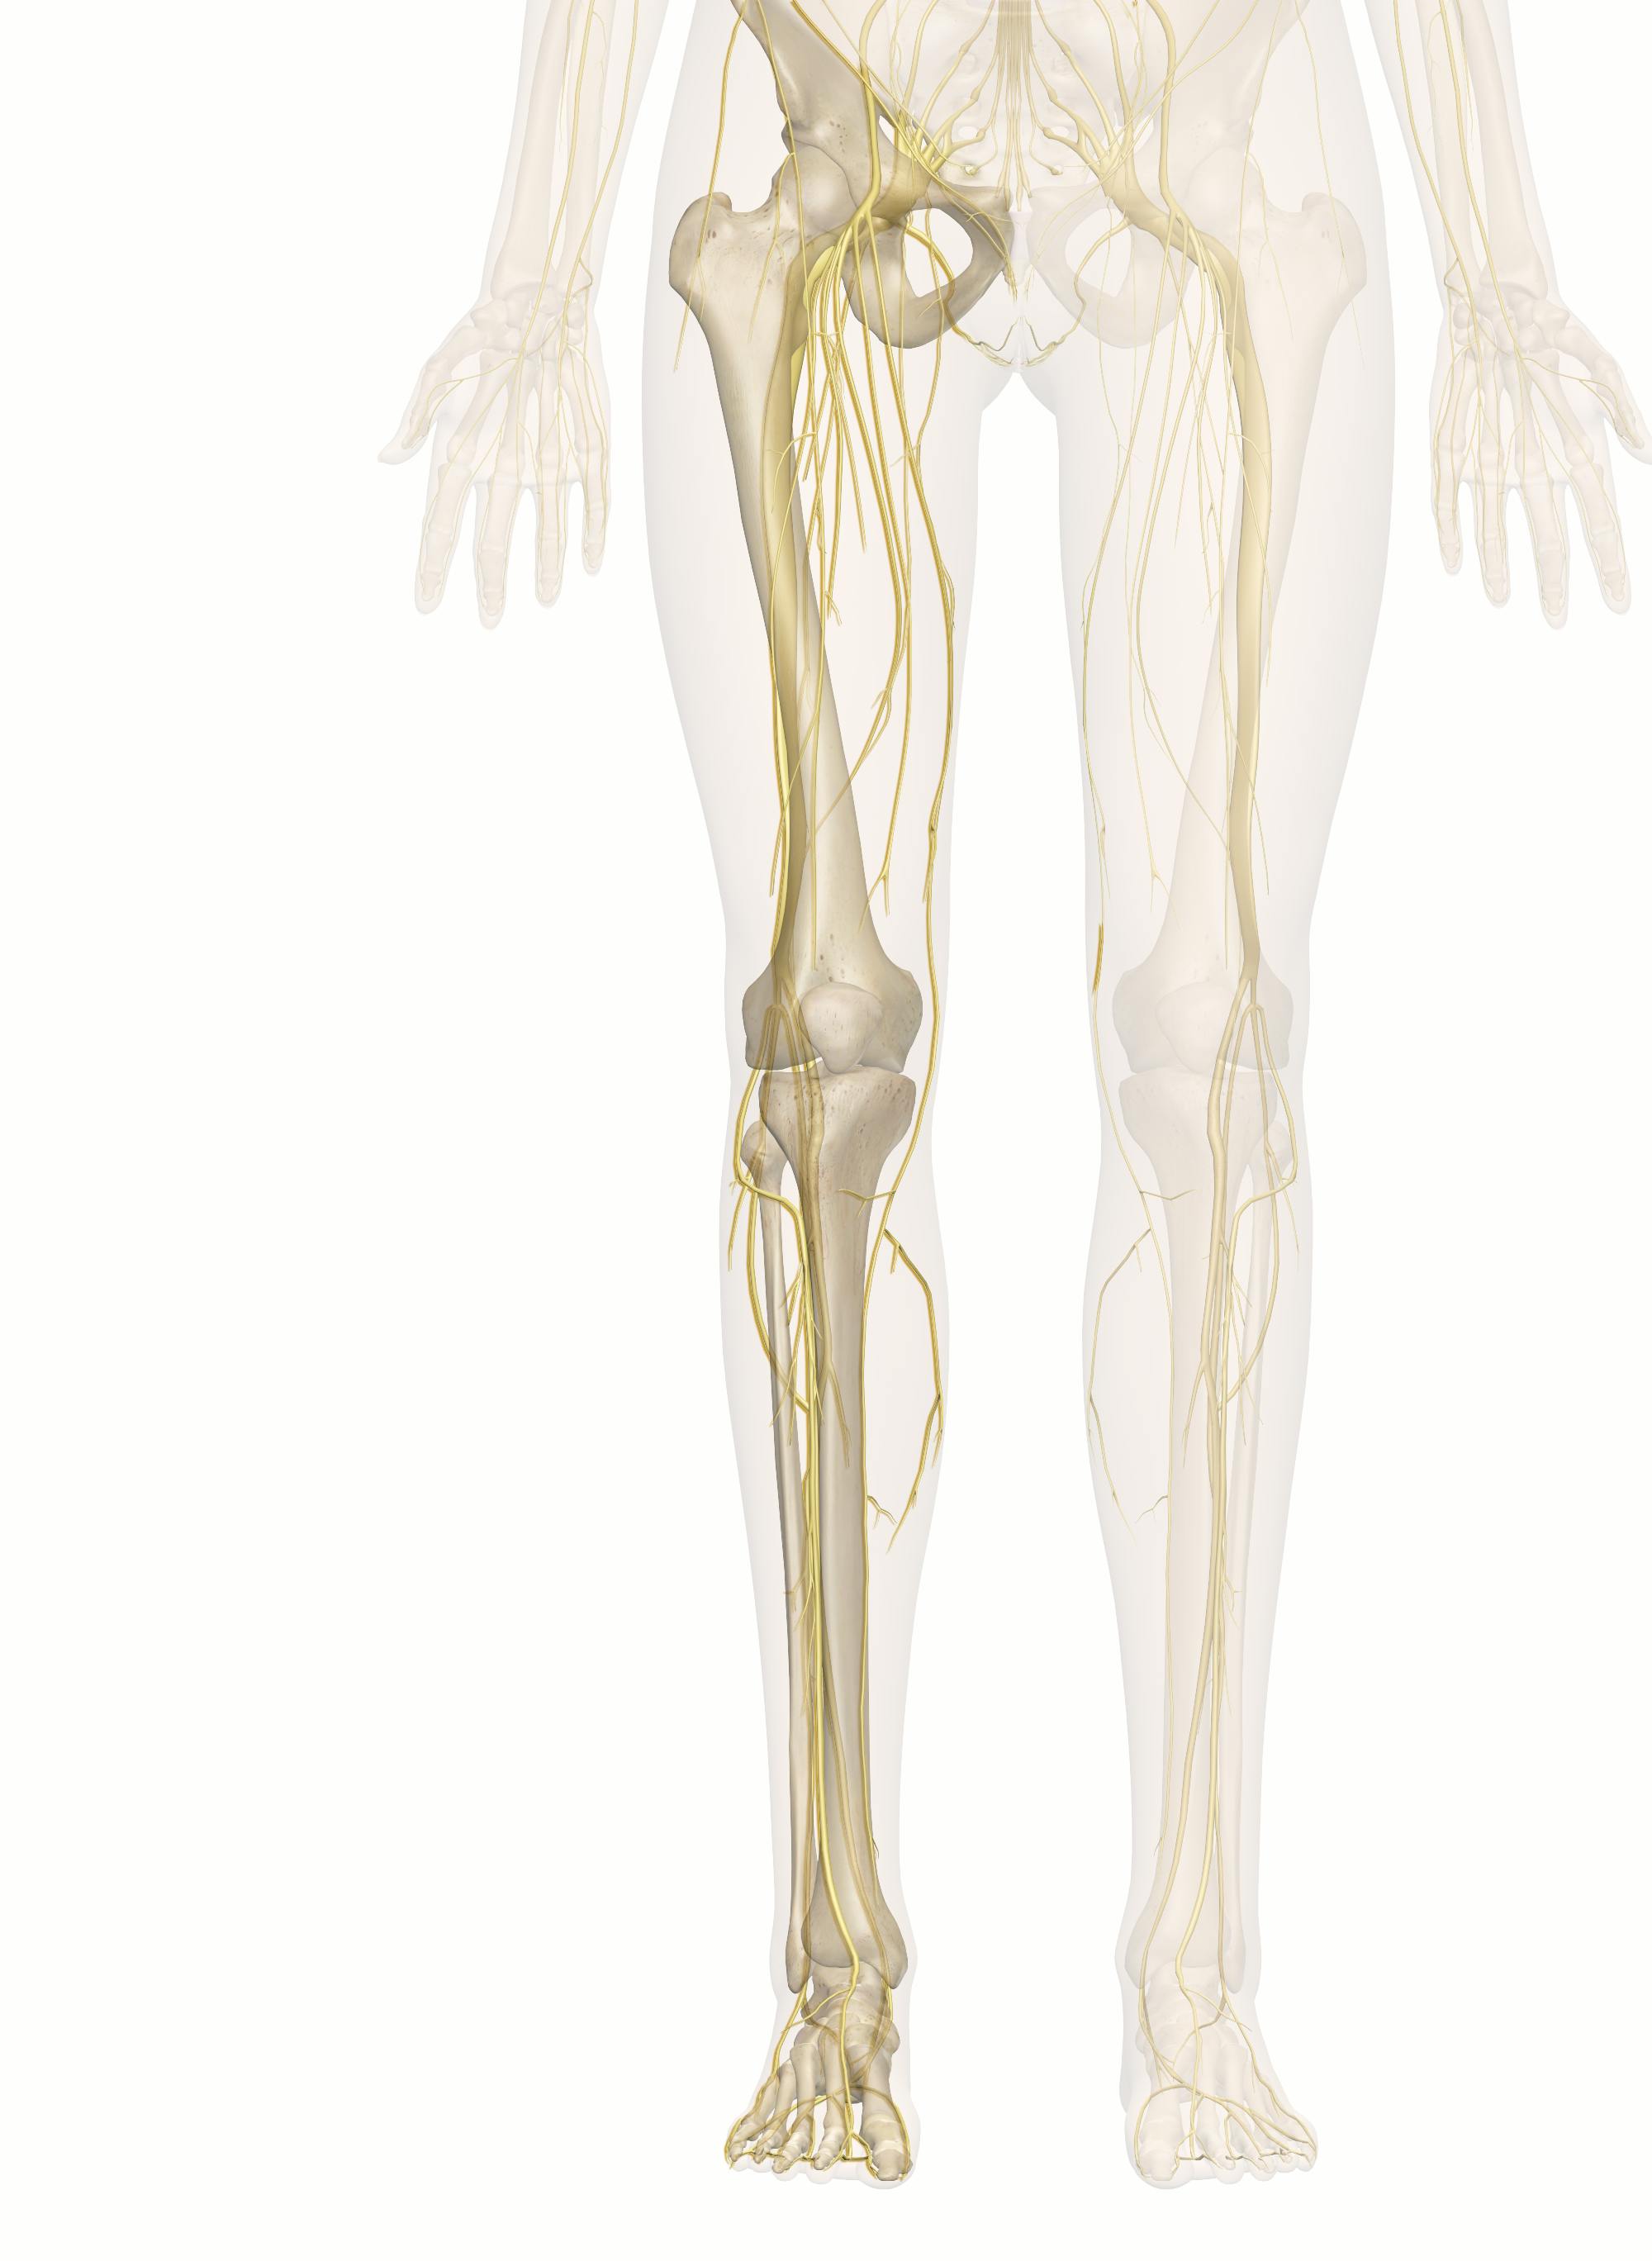 Nerves of the Leg and Foot | Interactive Anatomy Guide